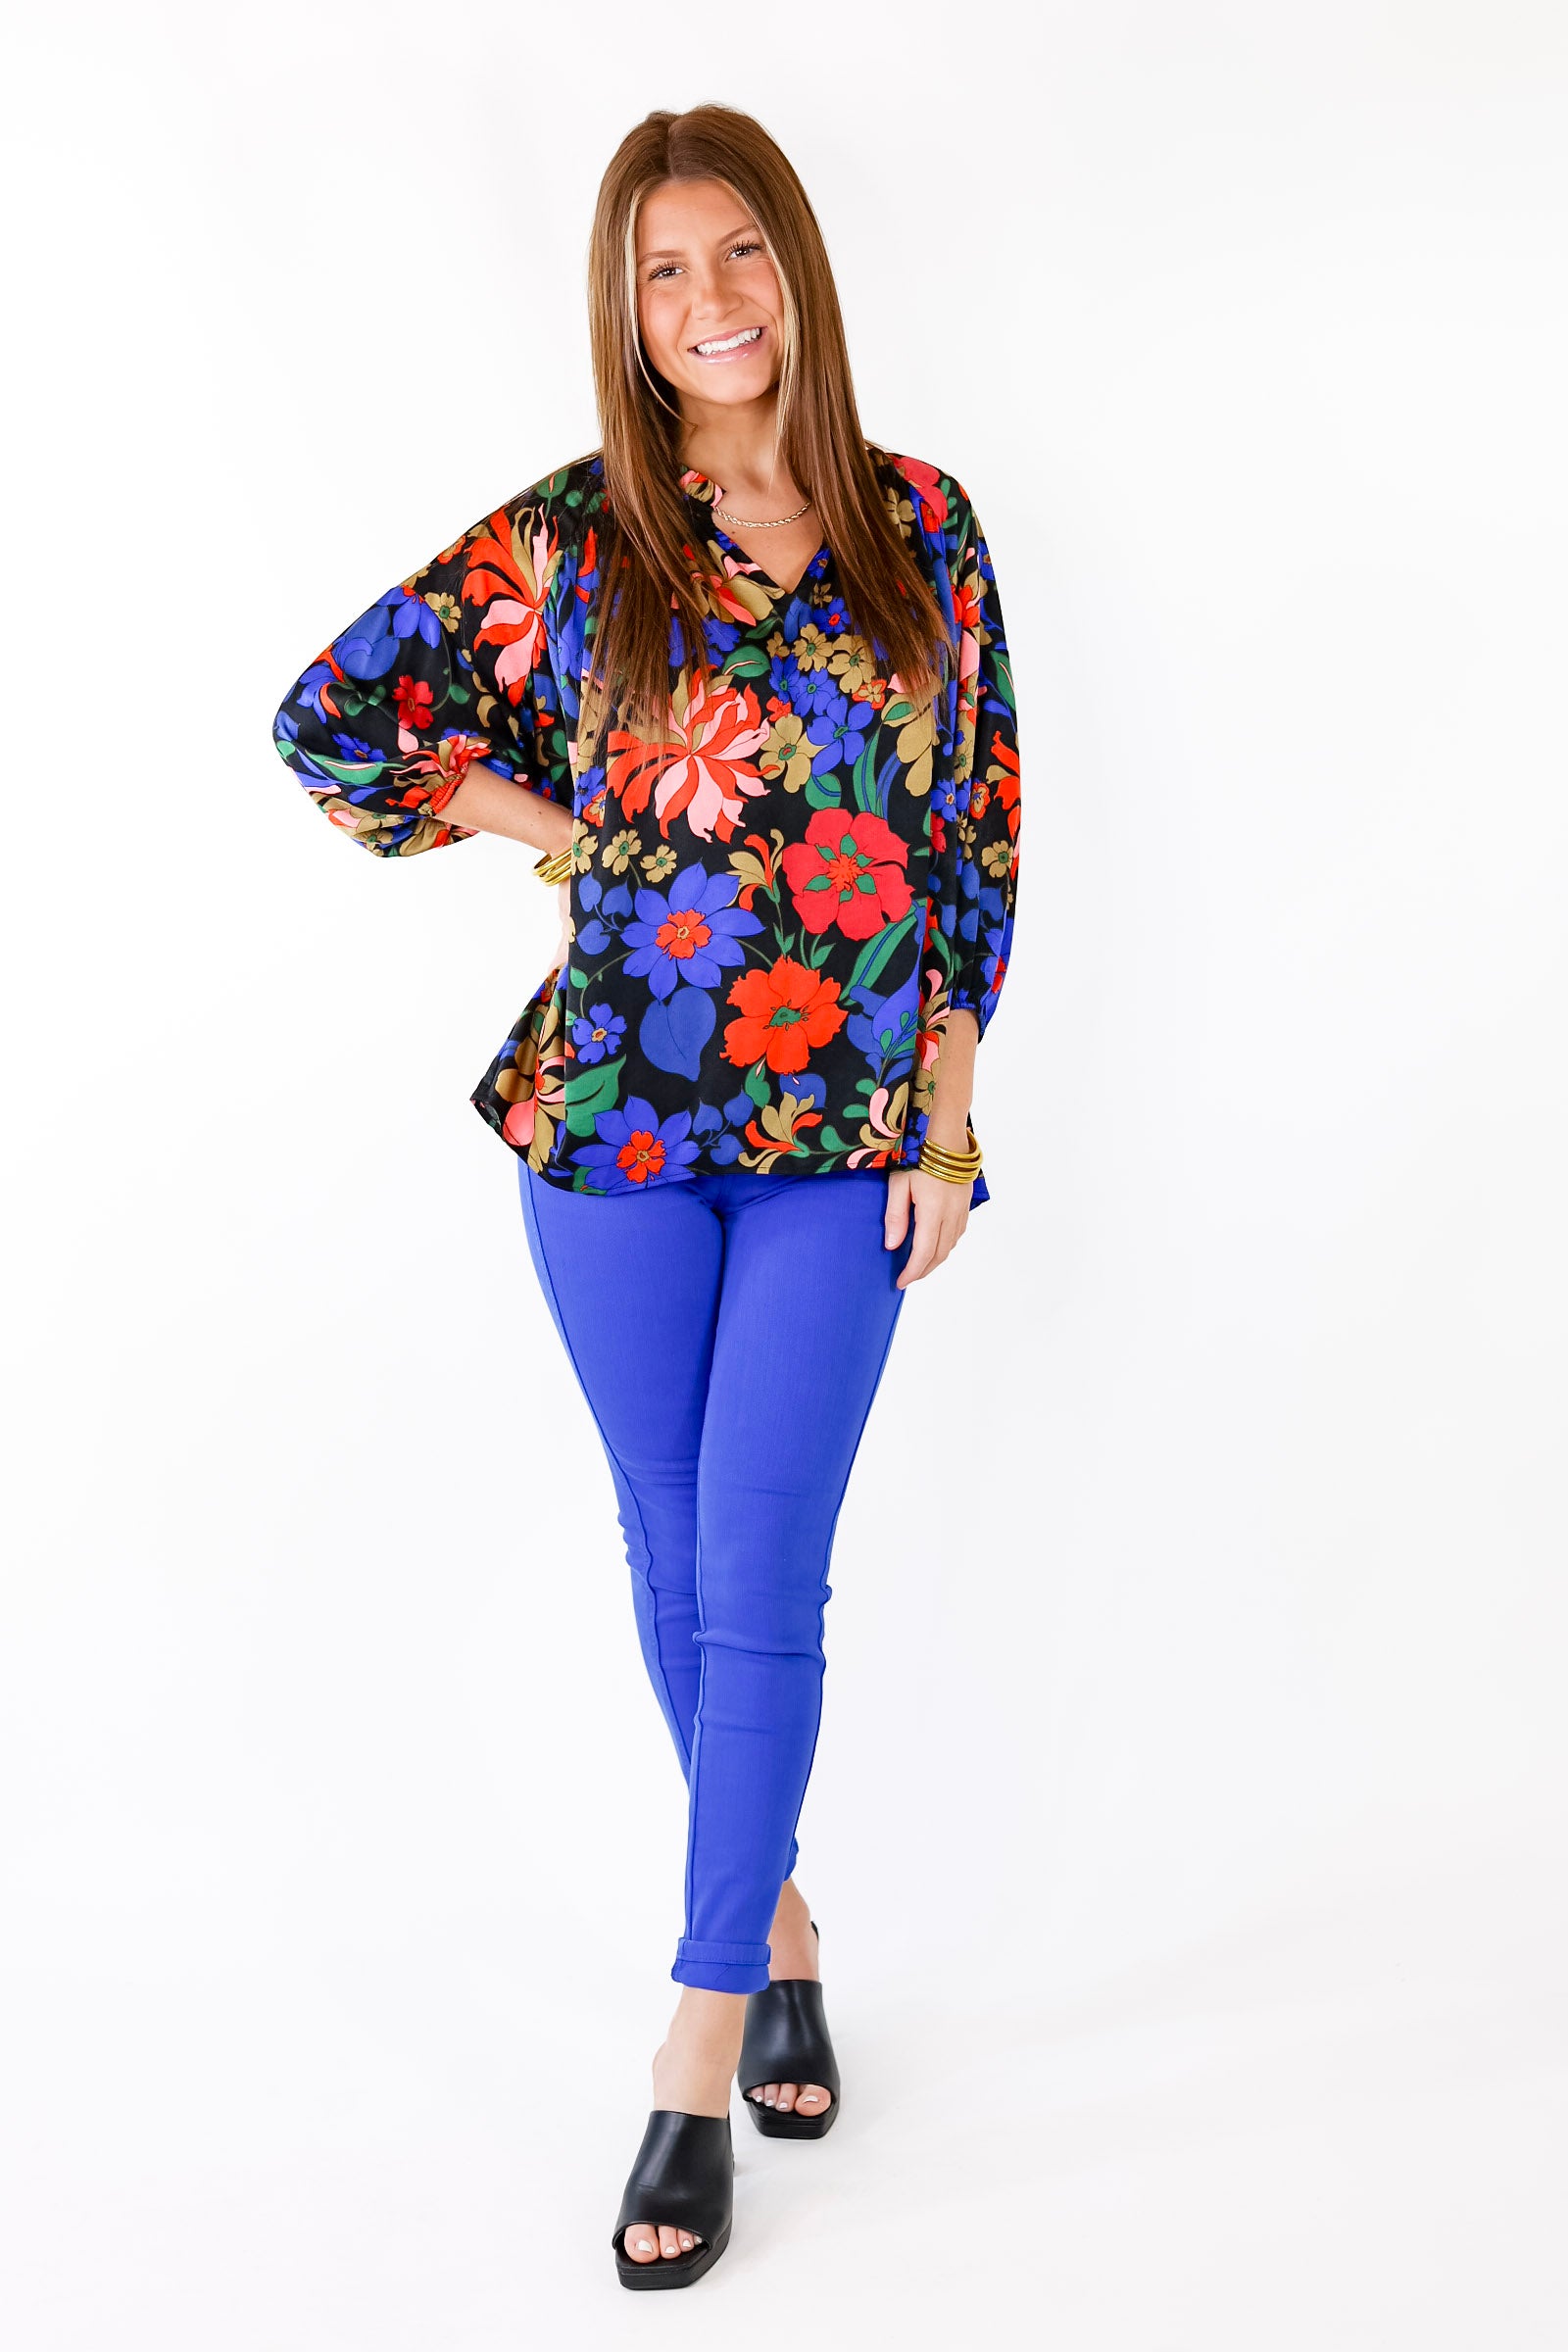 Falling For Floral 3/4 Sleeve Top with Notched Neck in Black - Giddy Up Glamour Boutique